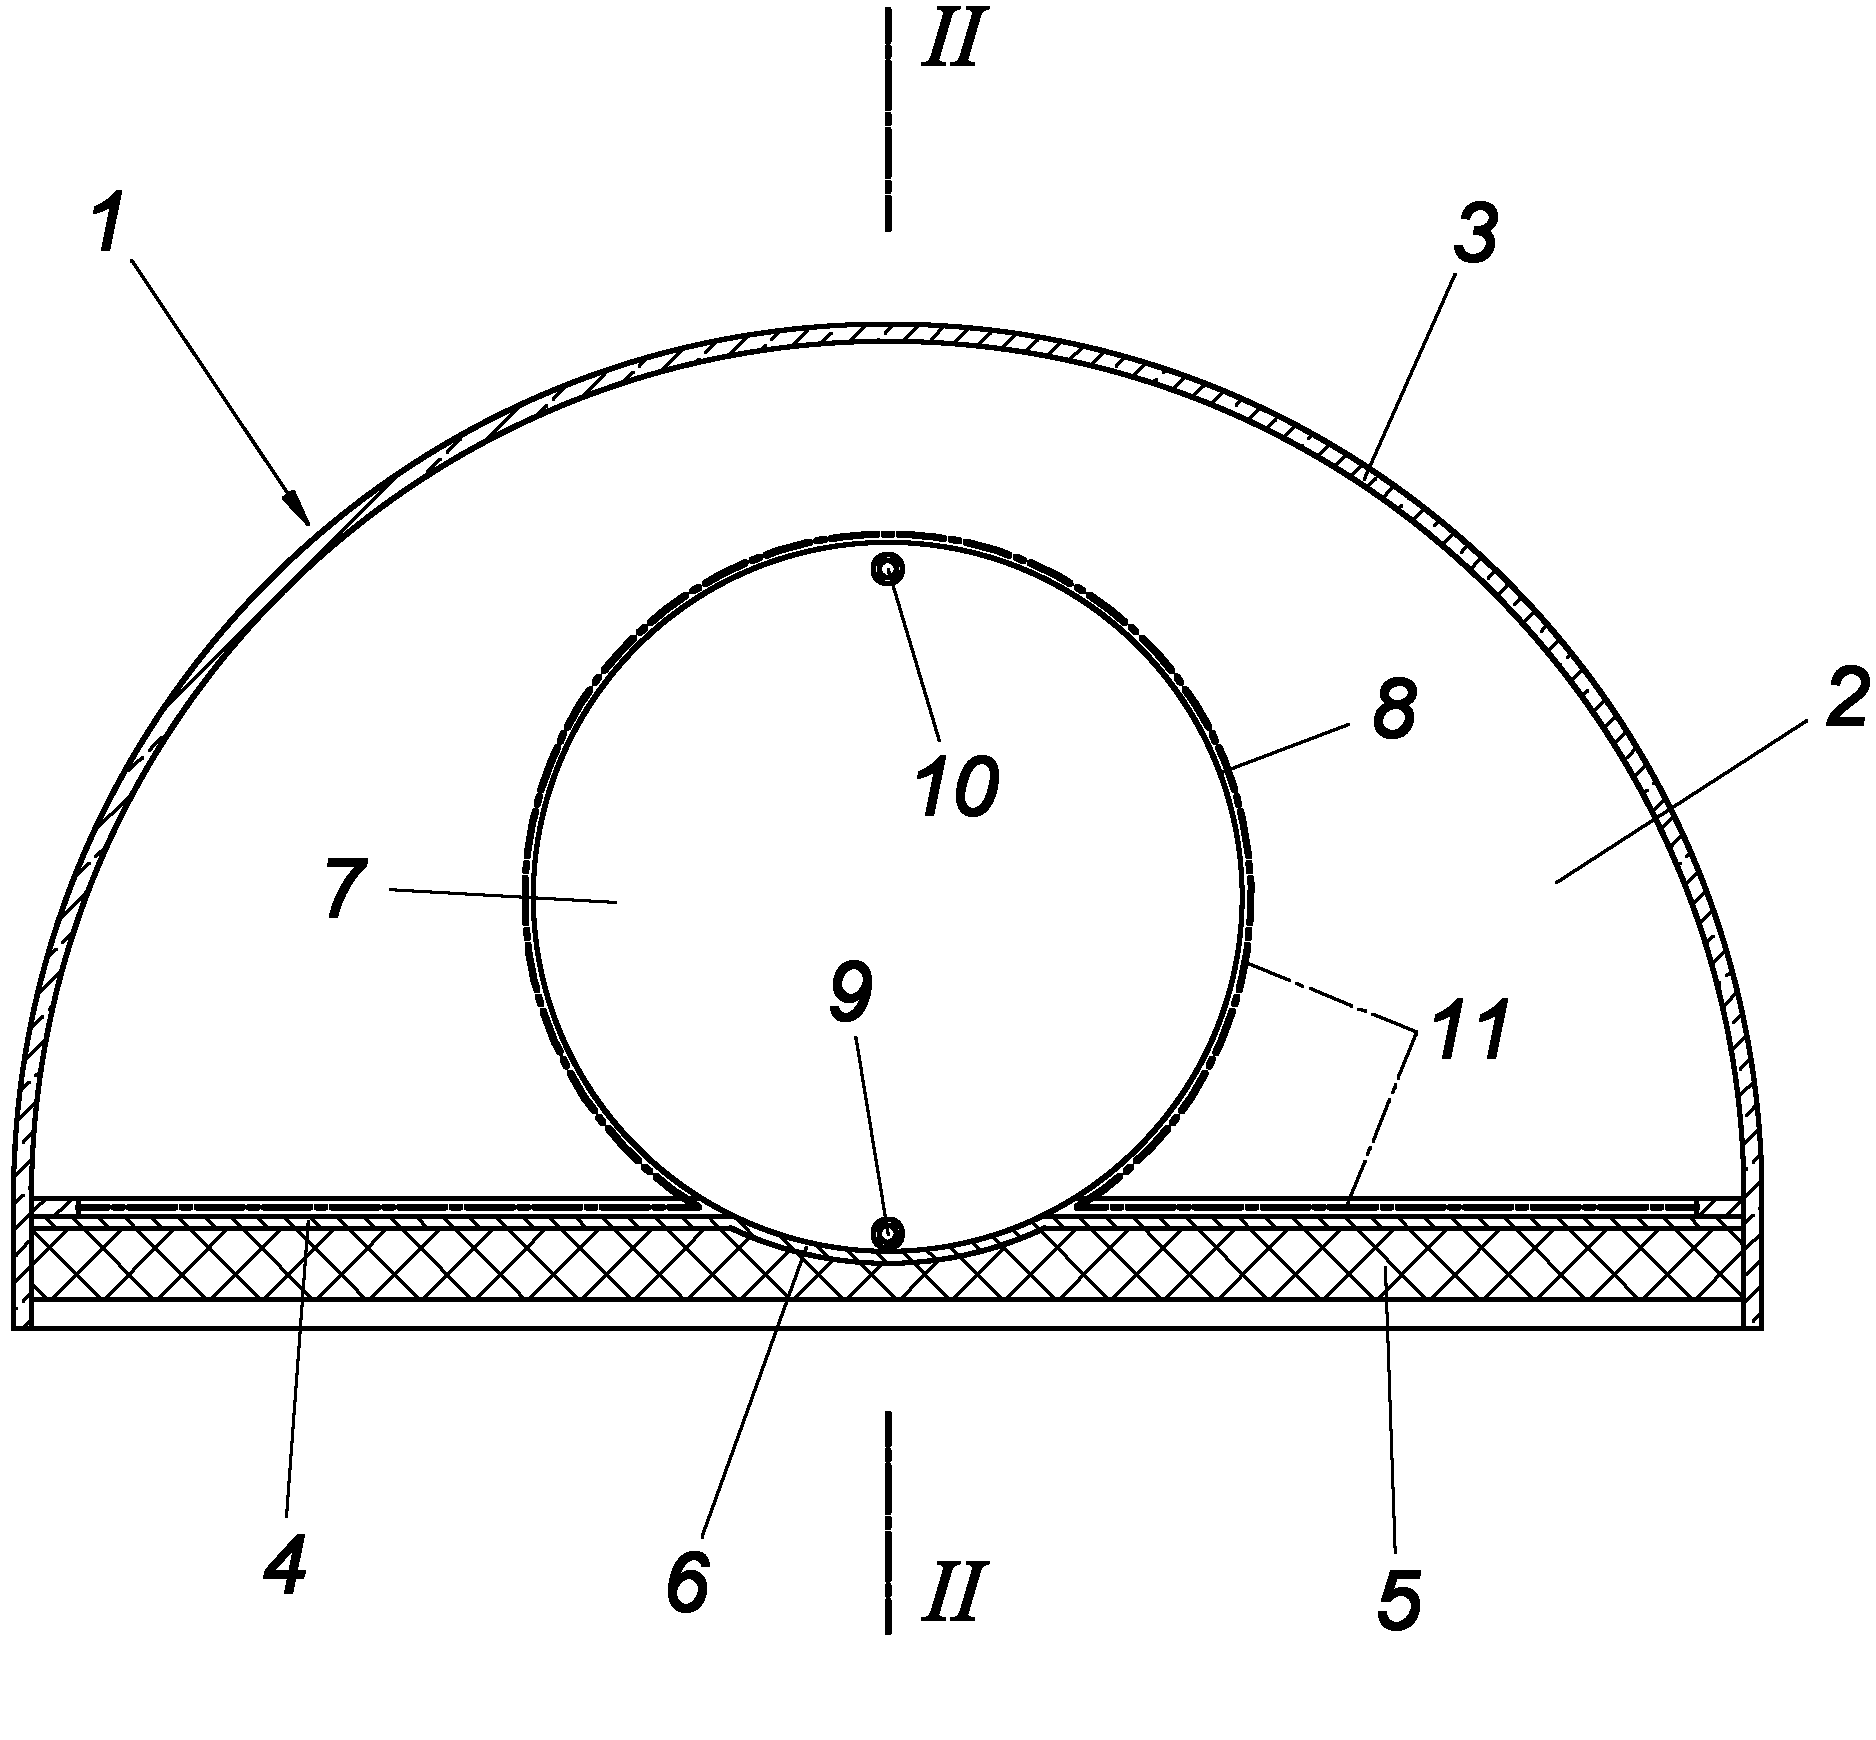 Device for heating process water